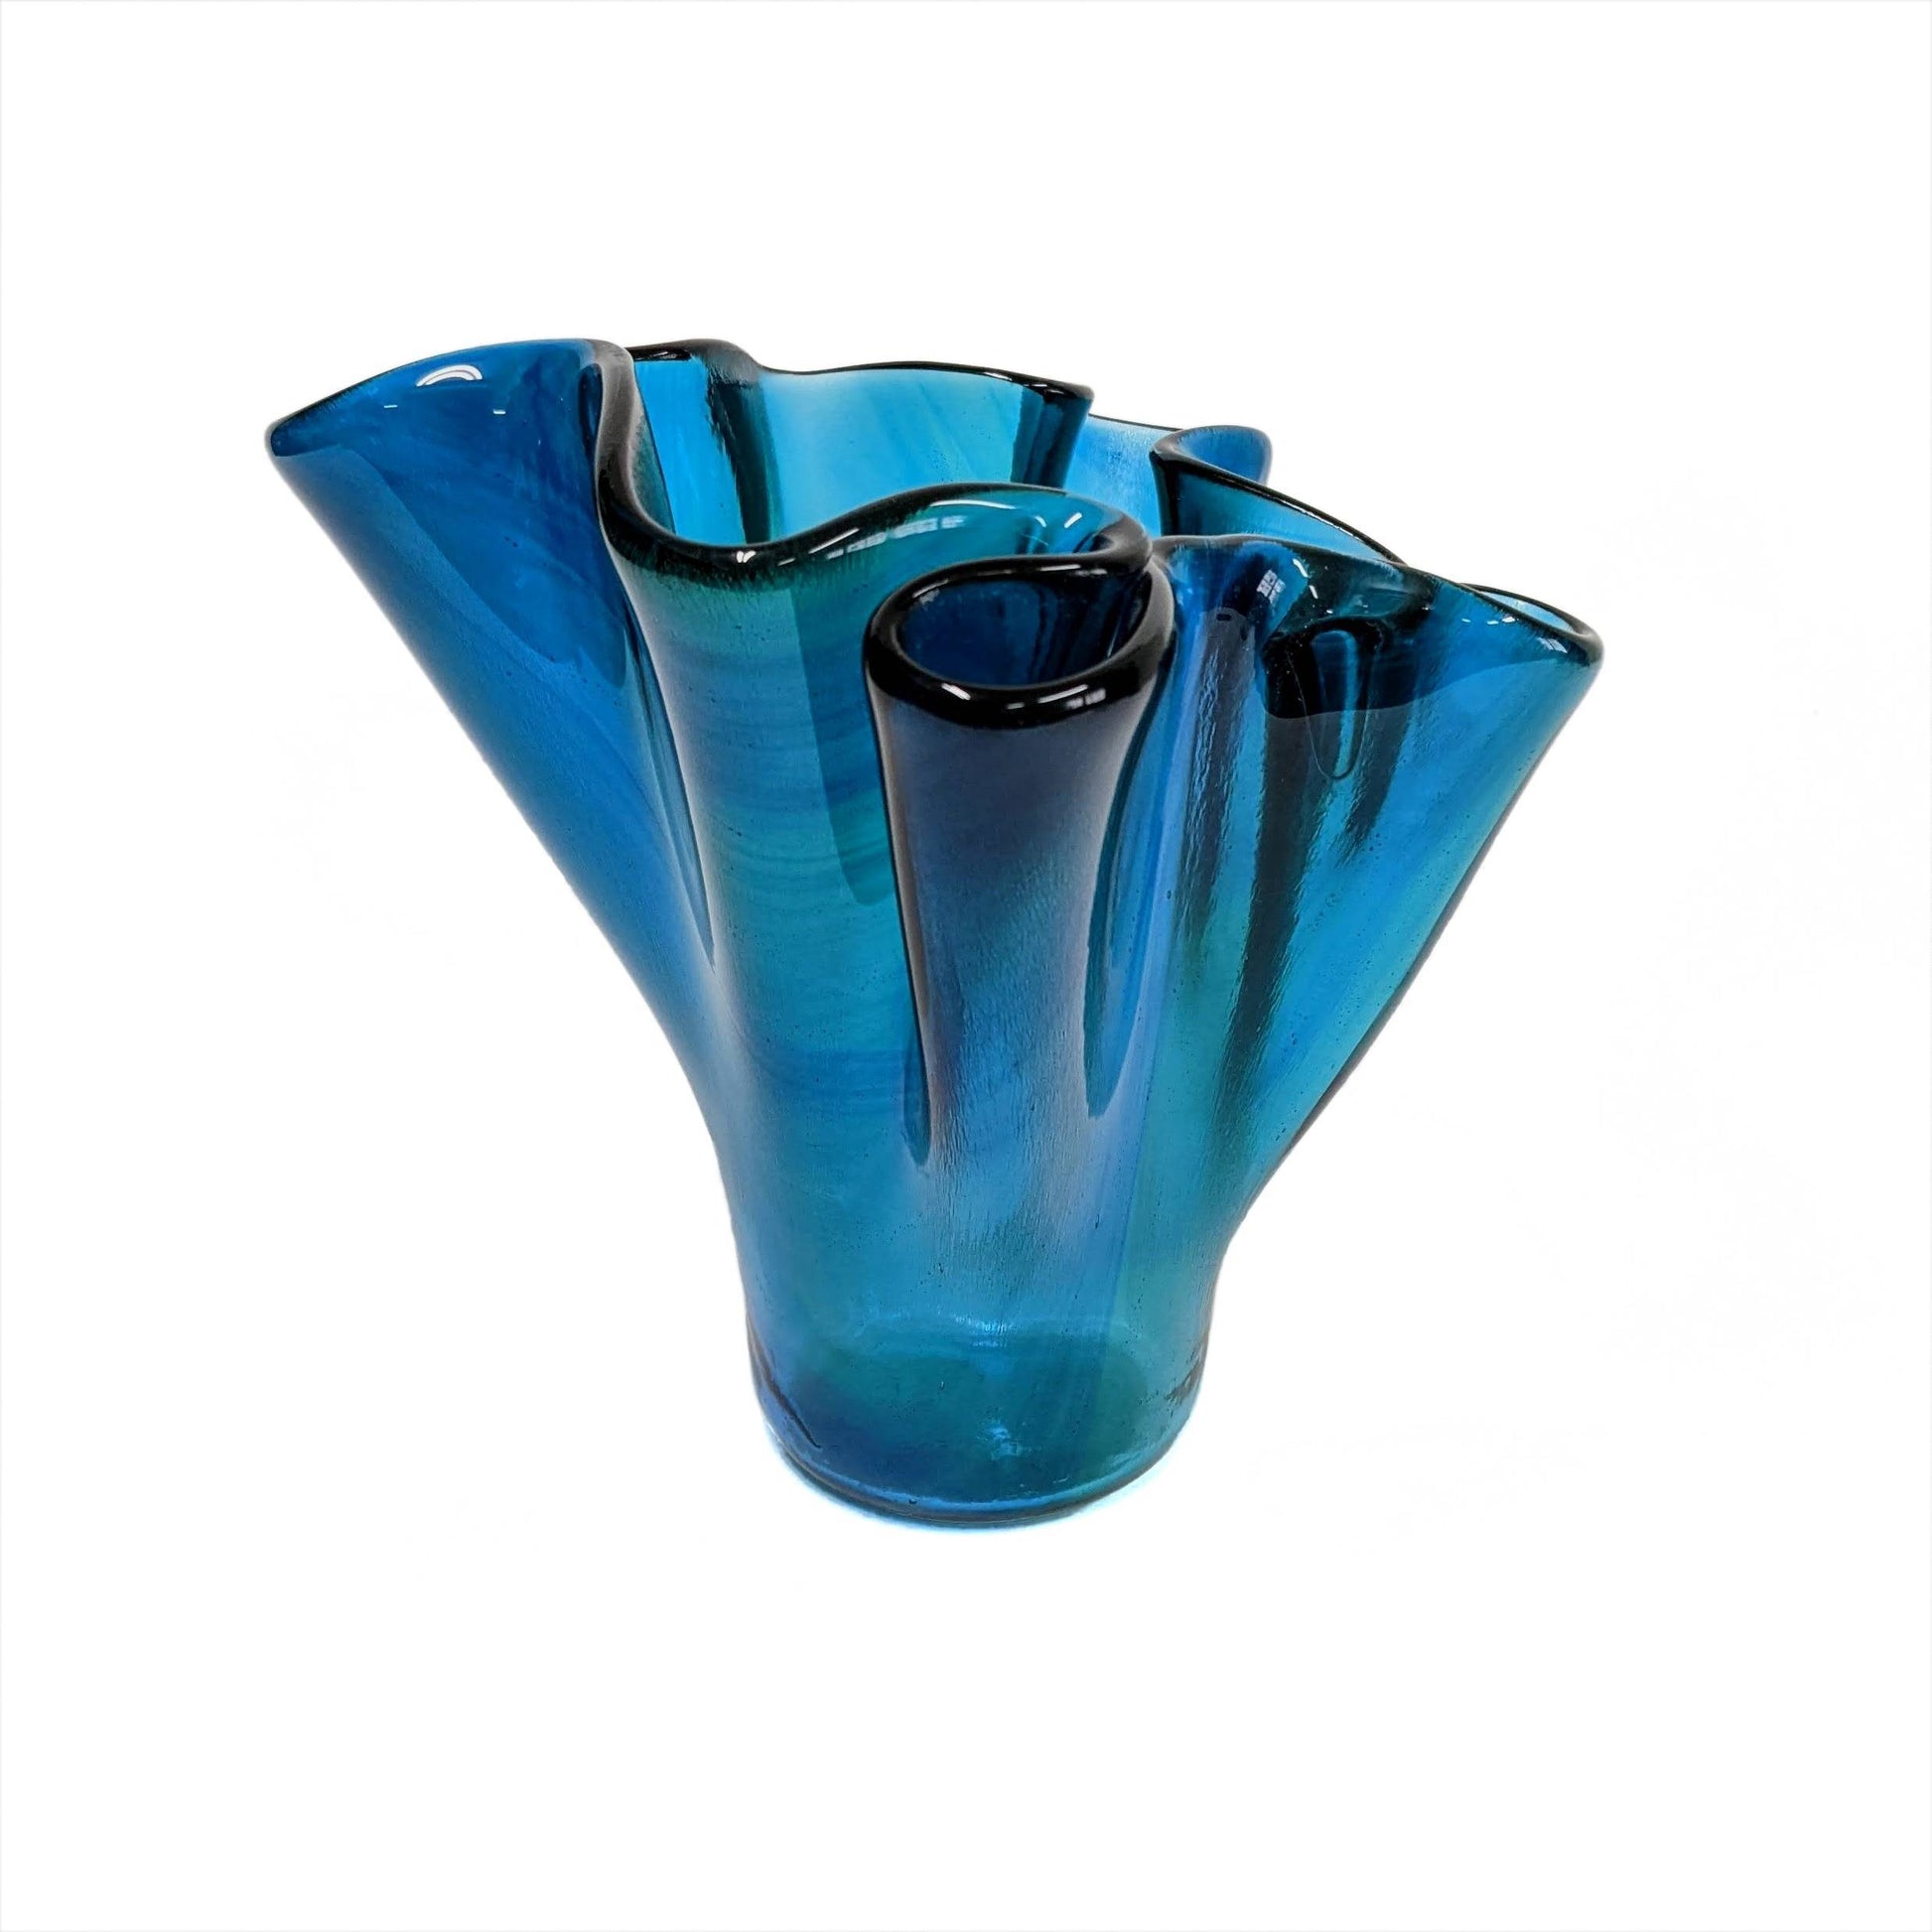 Glass Art Vase in Teal Aqua Turquoise Blue | Handcrafted Glass Vase